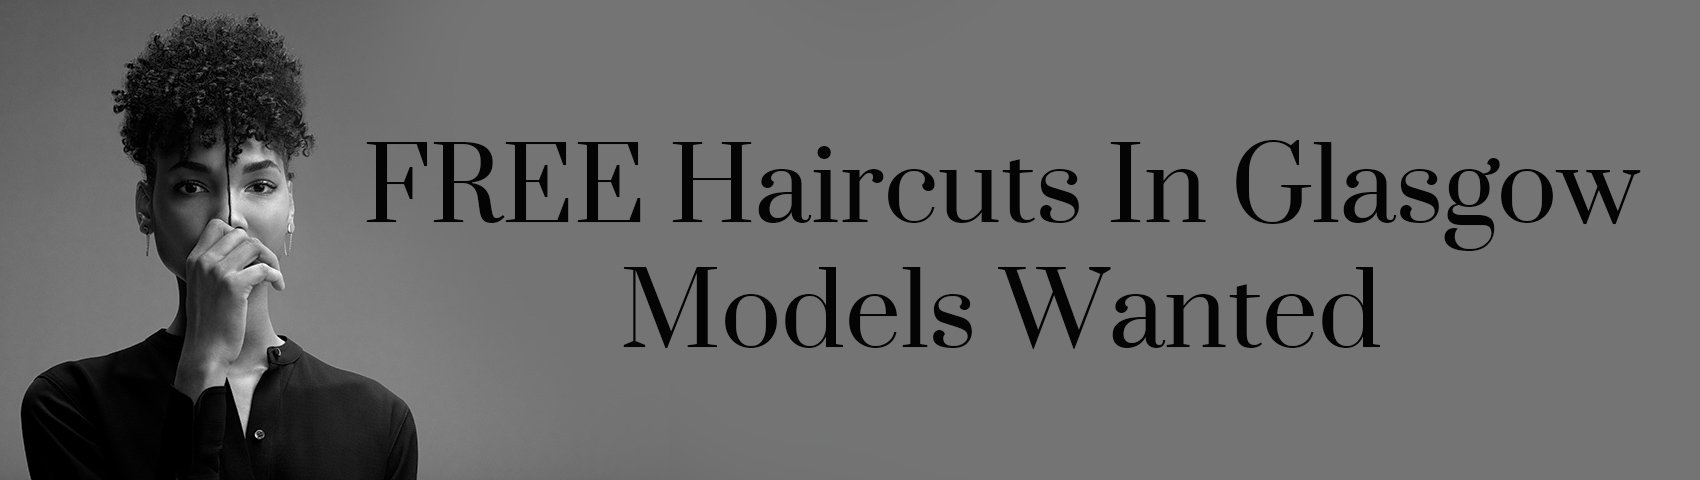 FREE Haircuts In Glasgow Models Wanted BANNER